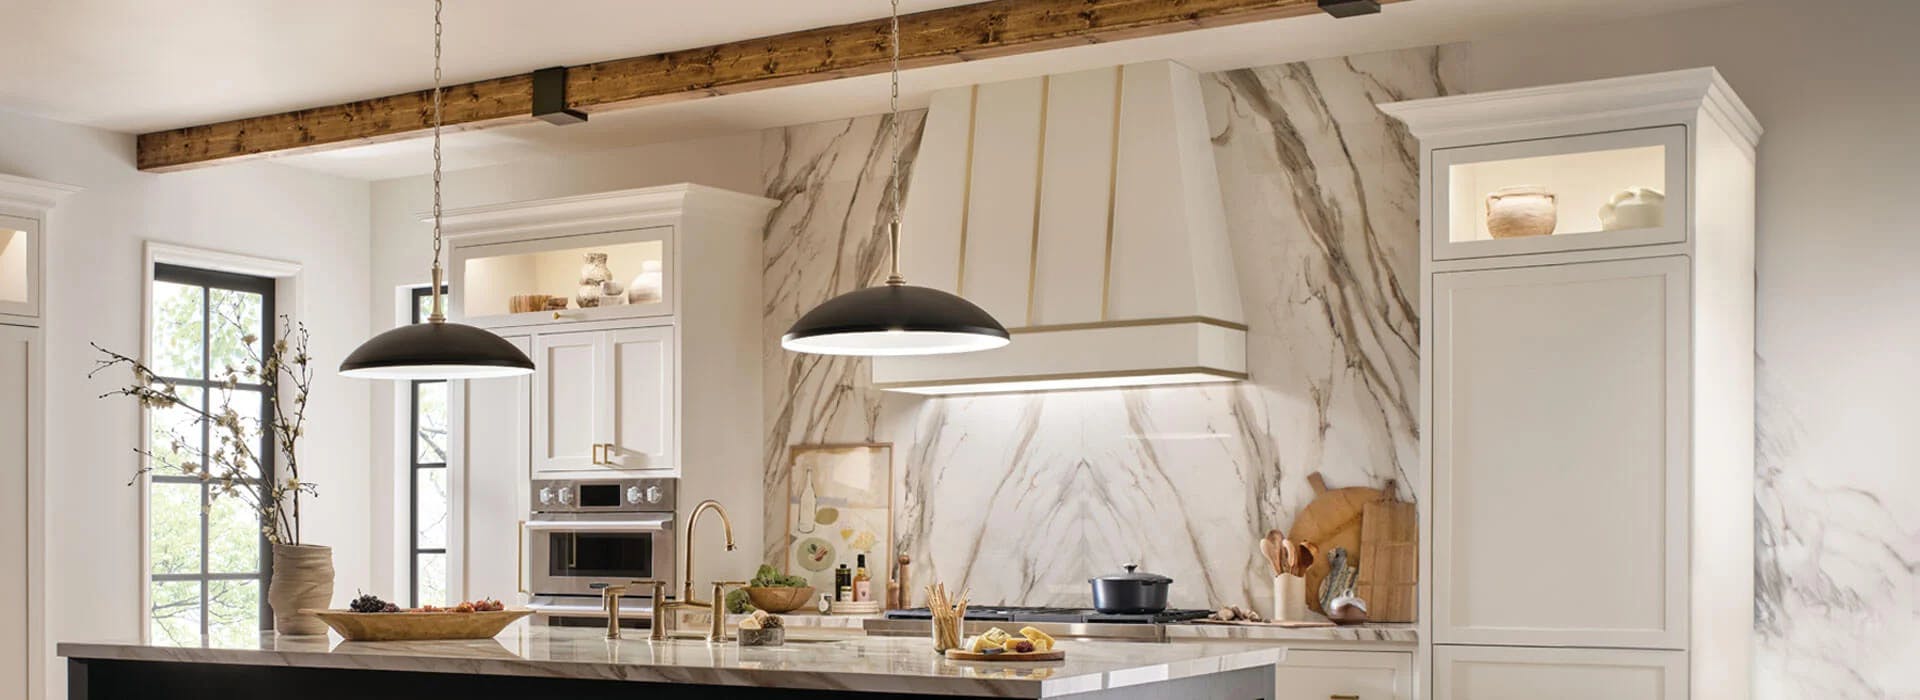 A modern kitchen with marble accents featuring two delarosa pendant lights over a kitchen island.